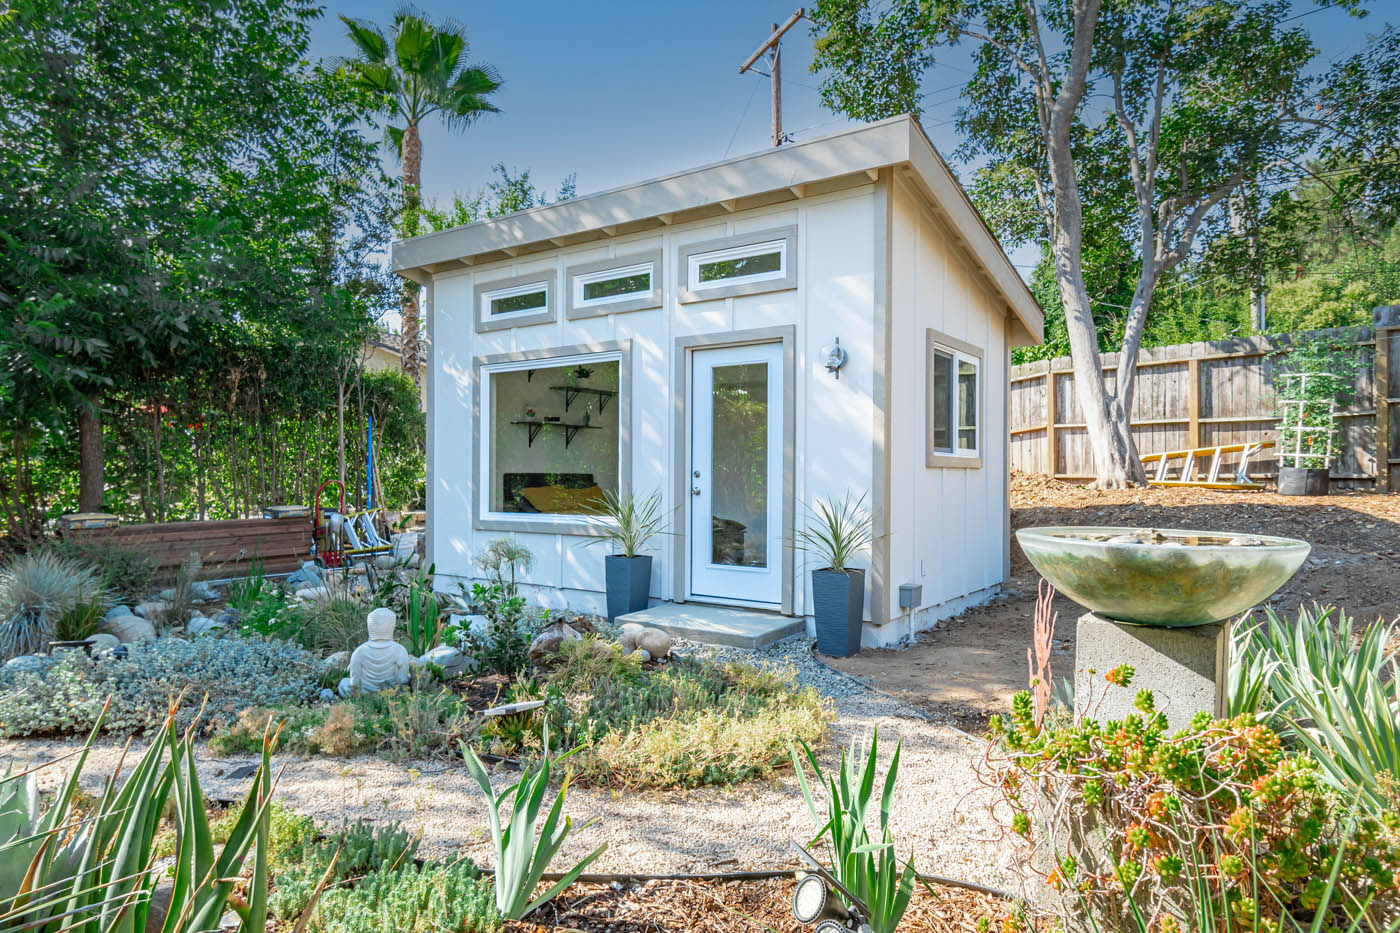 A beautiful small ADU built on a property perfect for an office space - learn more about Anchored Tiny Homes your expert backyard office contractors in Jacksonville, FL.